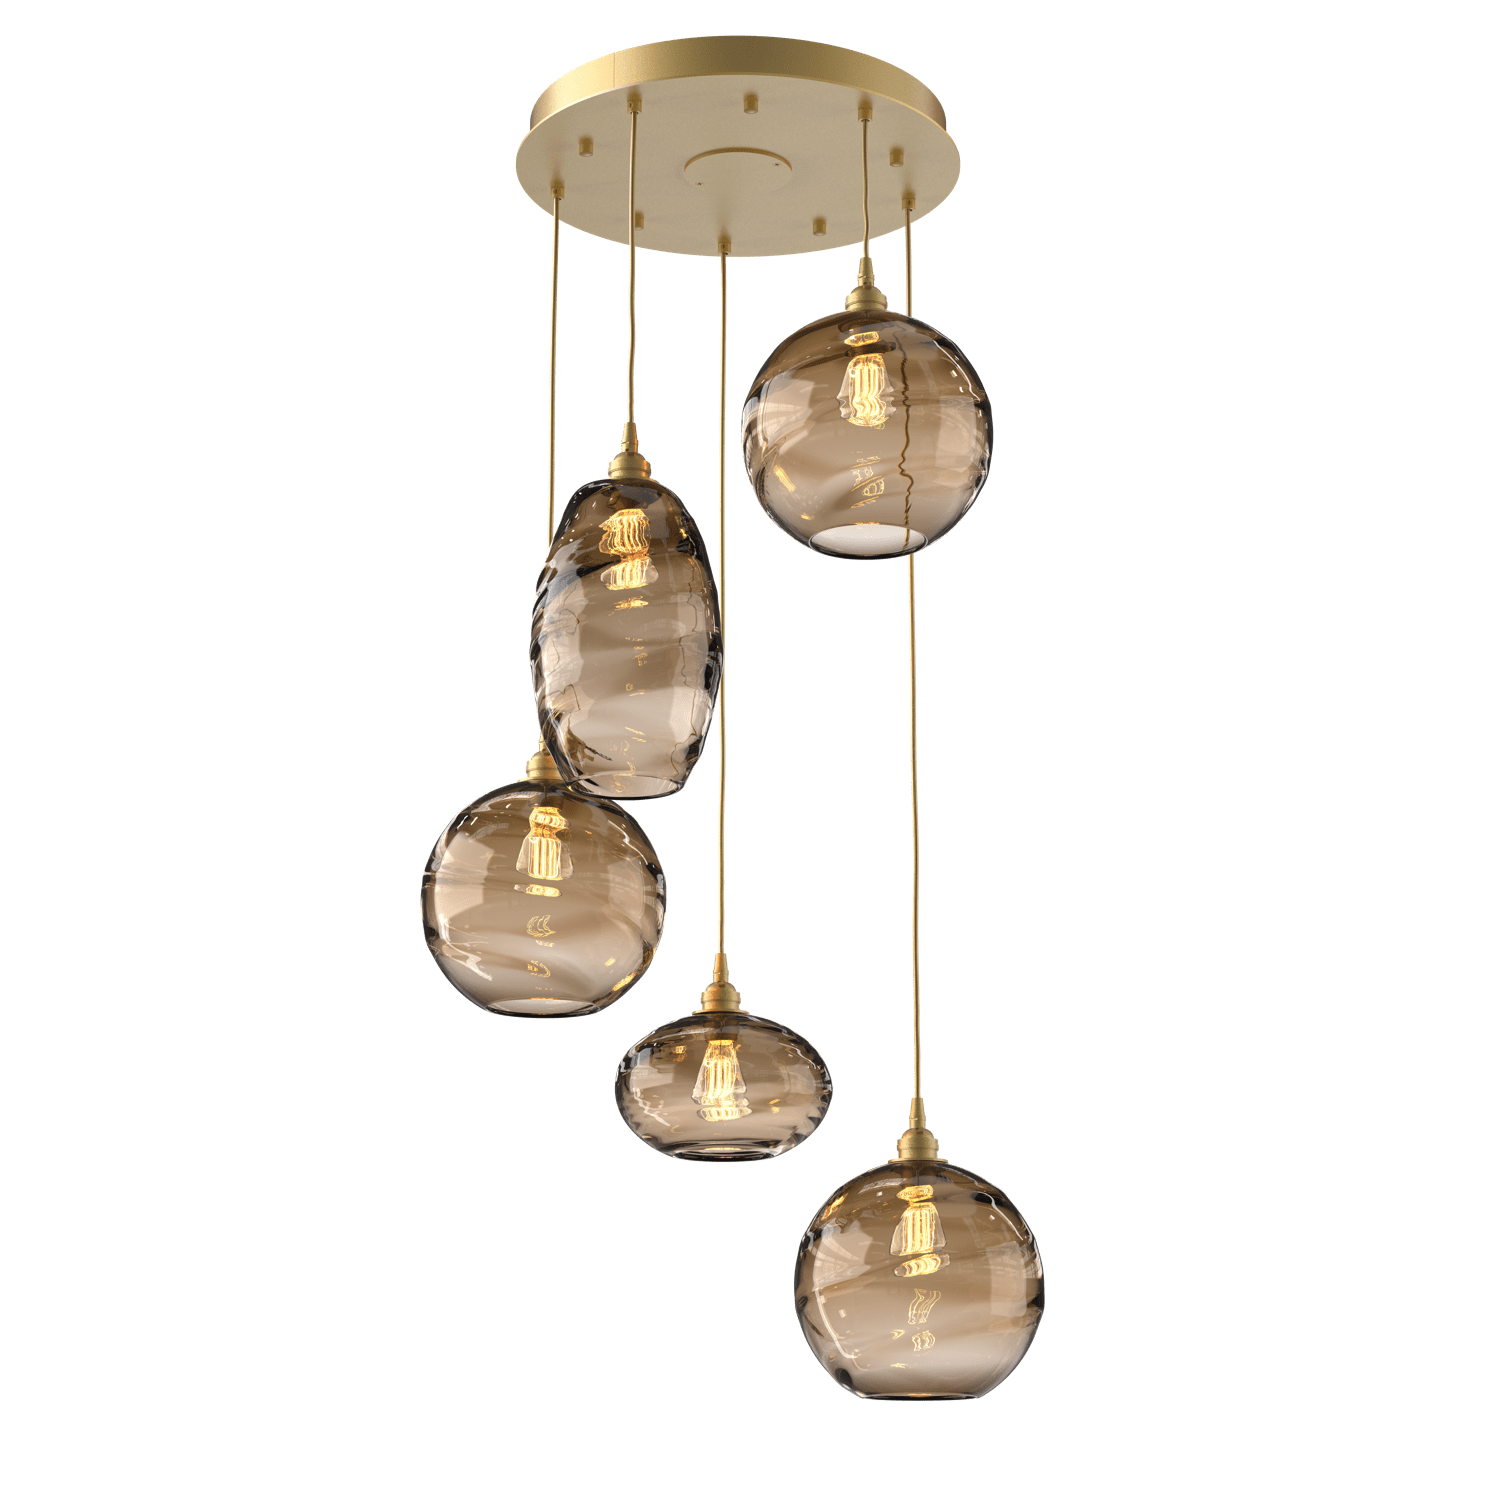 CHB0048-05-GB-OB-Hammerton-Studio-Optic-Blown-Glass-Misto-5-light-round-pendant-chandelier-with-gilded-brass-finish-and-optic-bronze-blown-glass-shades-and-incandescent-lamping